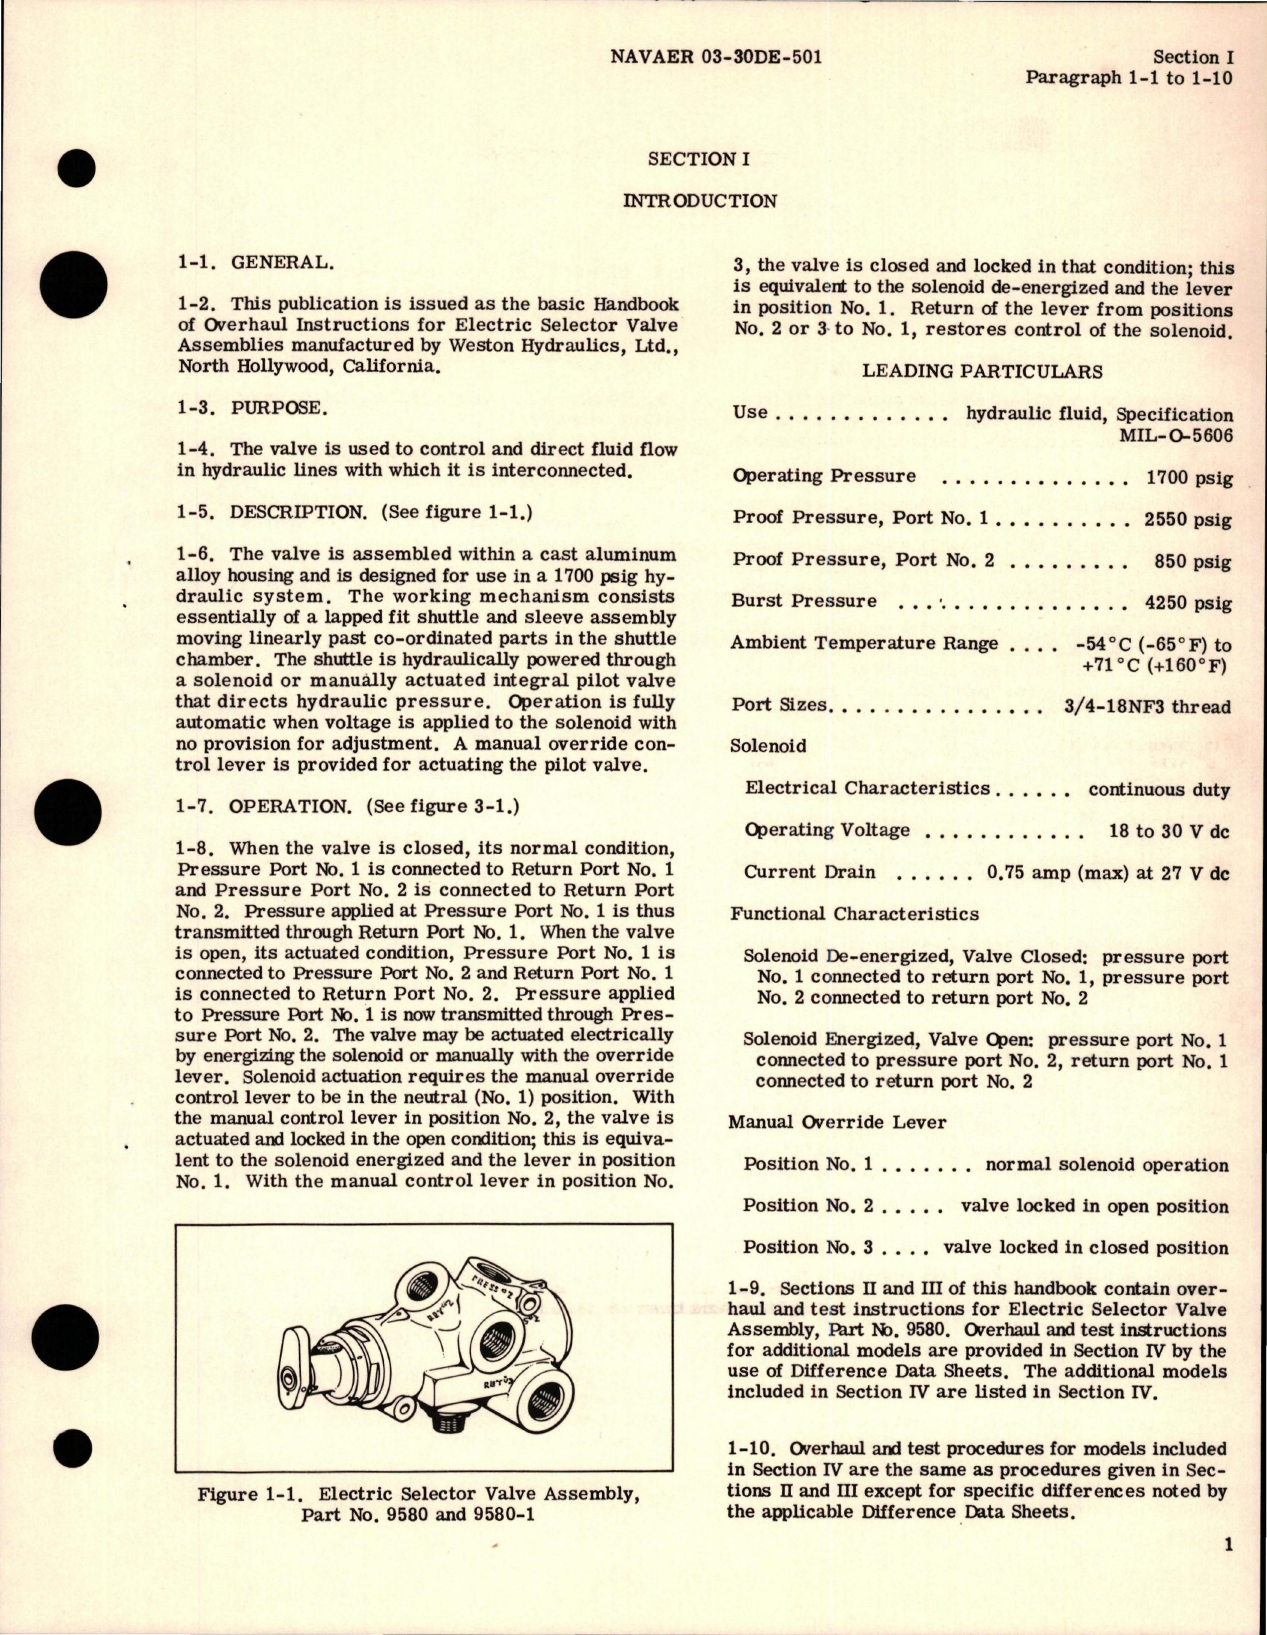 Sample page 5 from AirCorps Library document: Overhaul Instructions for Electric Selector Valve Assembly - Part 9580 and 9580-1